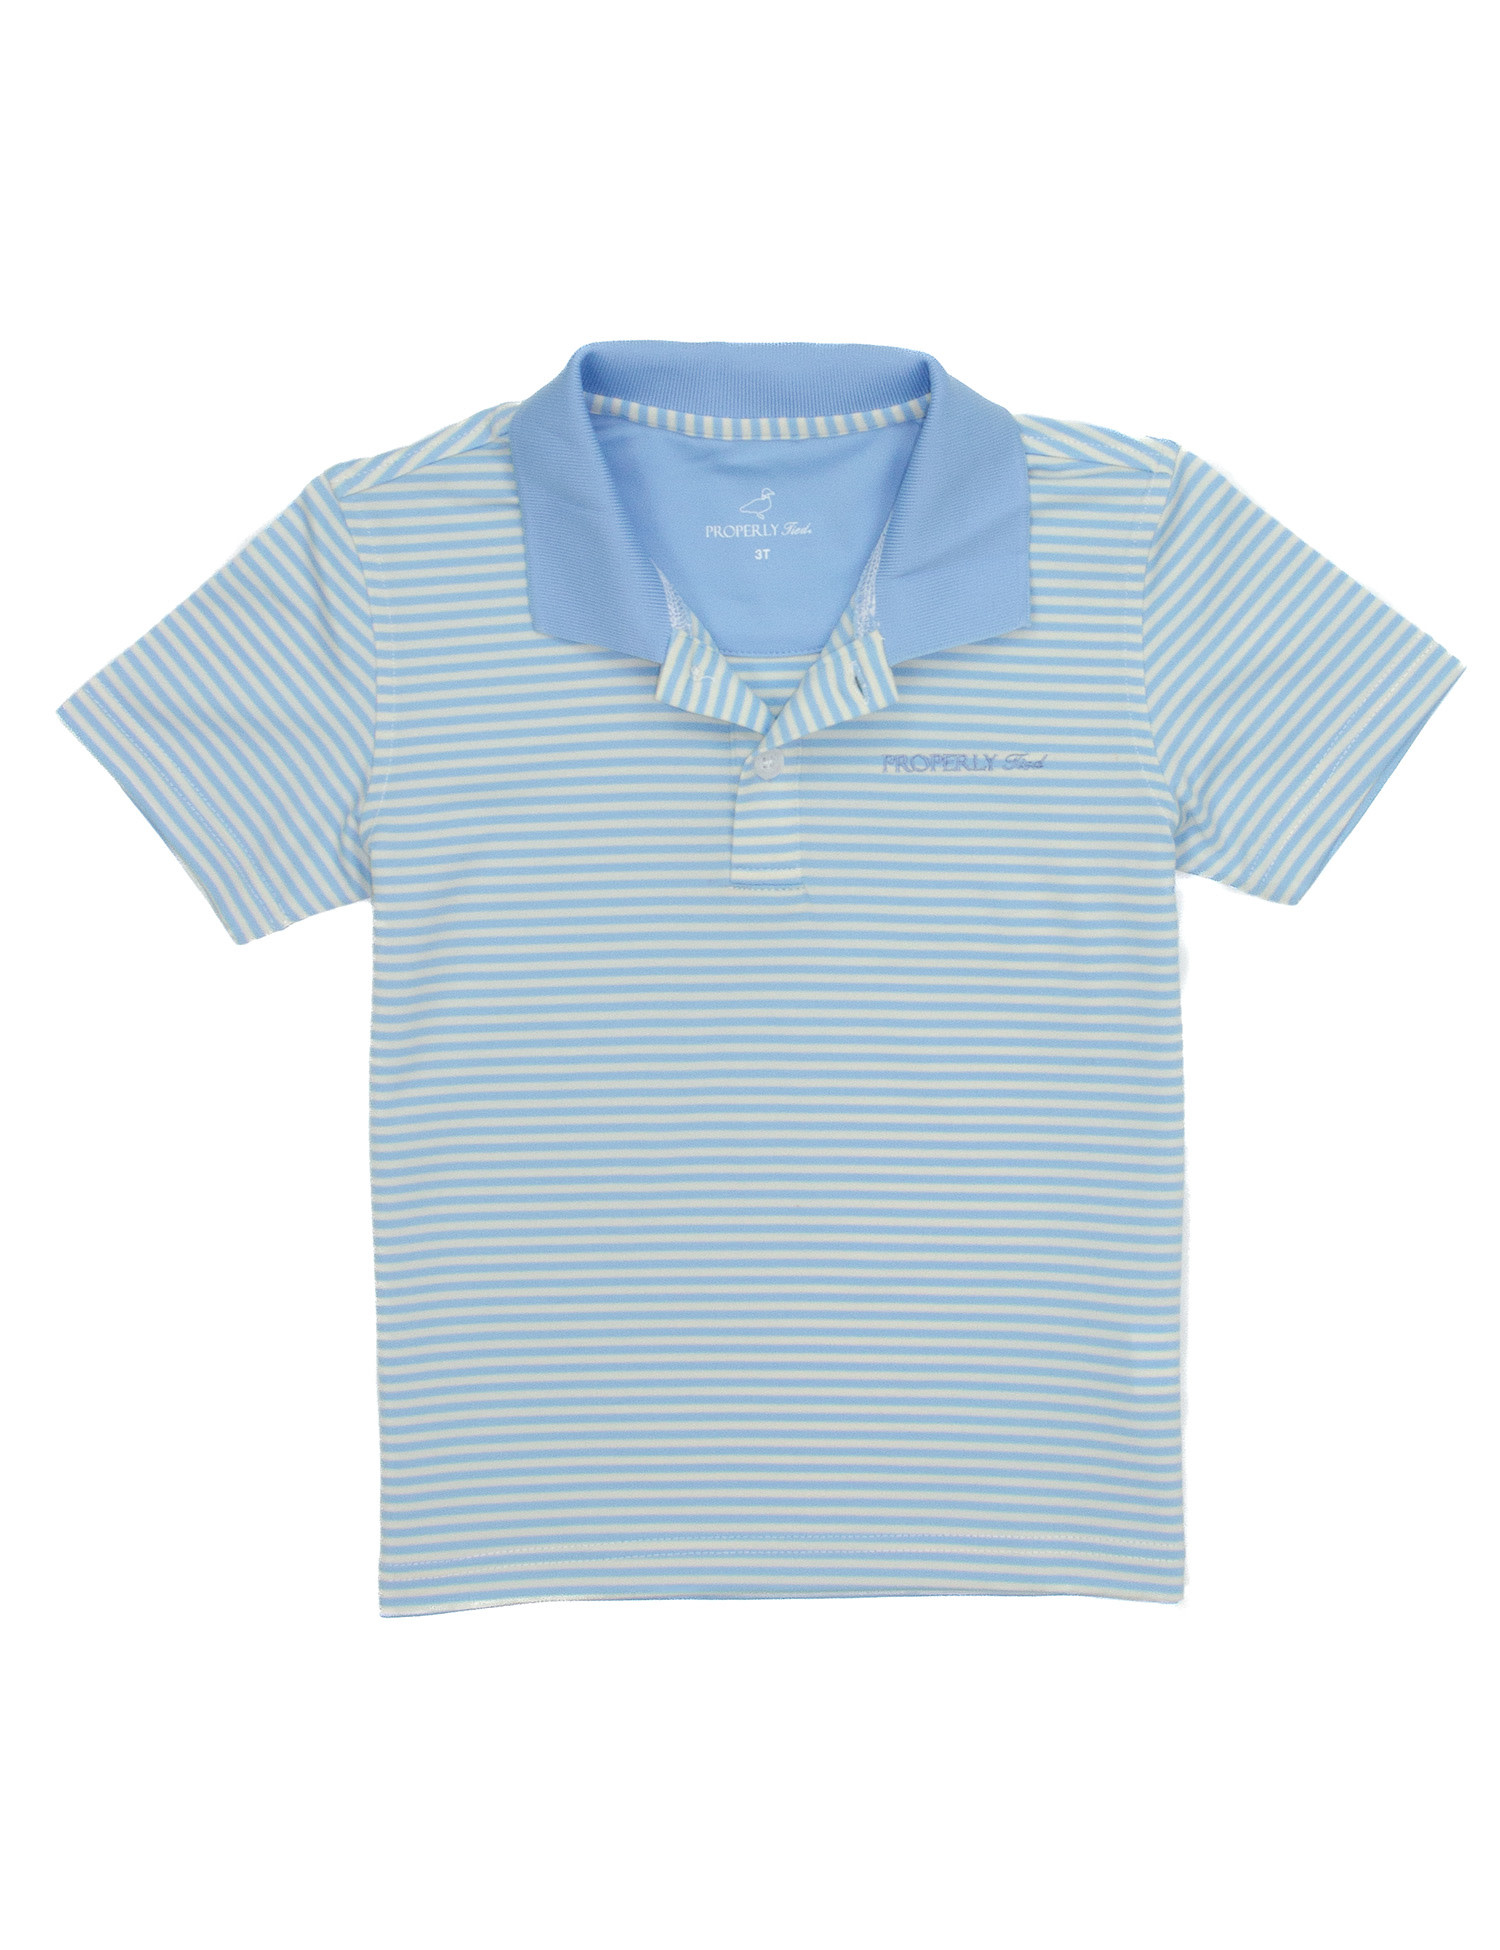 Properly Tied Boy S/S Polo